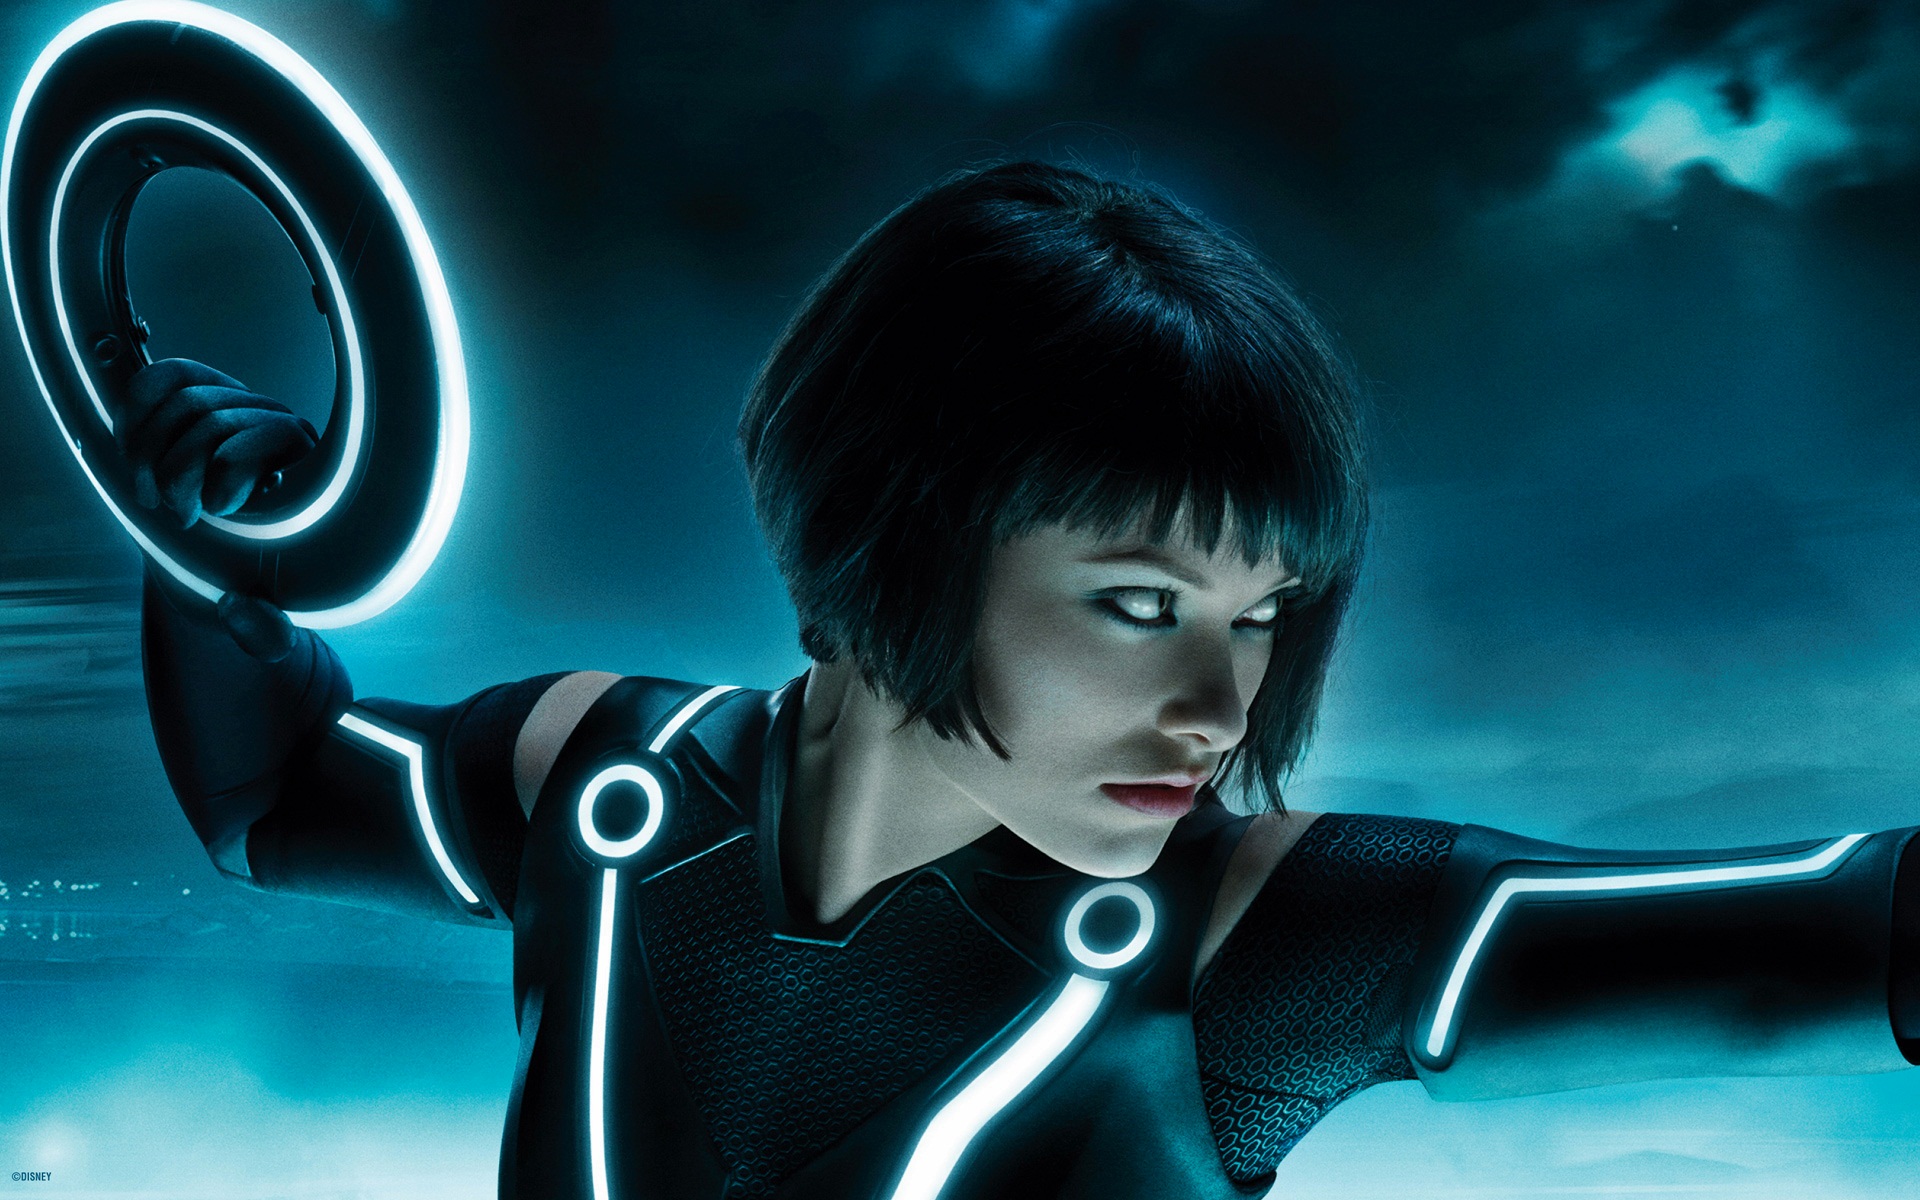 Olivia Wilde Tron Legacy Multi Monitor Wallpapers HD Wallpapers 1920x1200